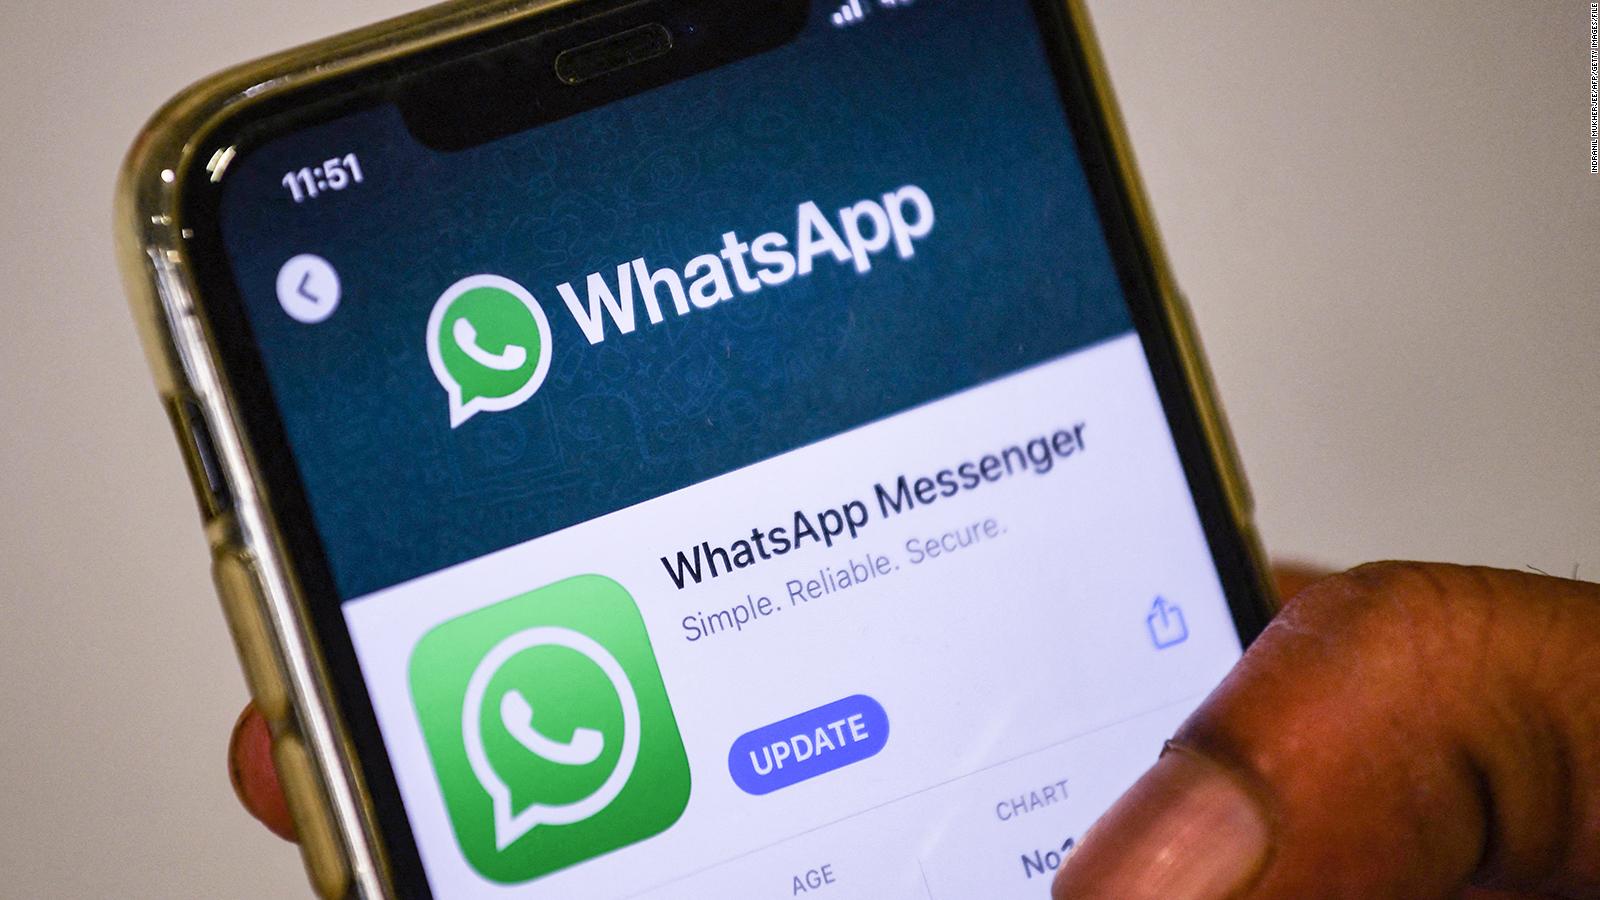 WhatsApp now allows you to use the same account on multiple phones